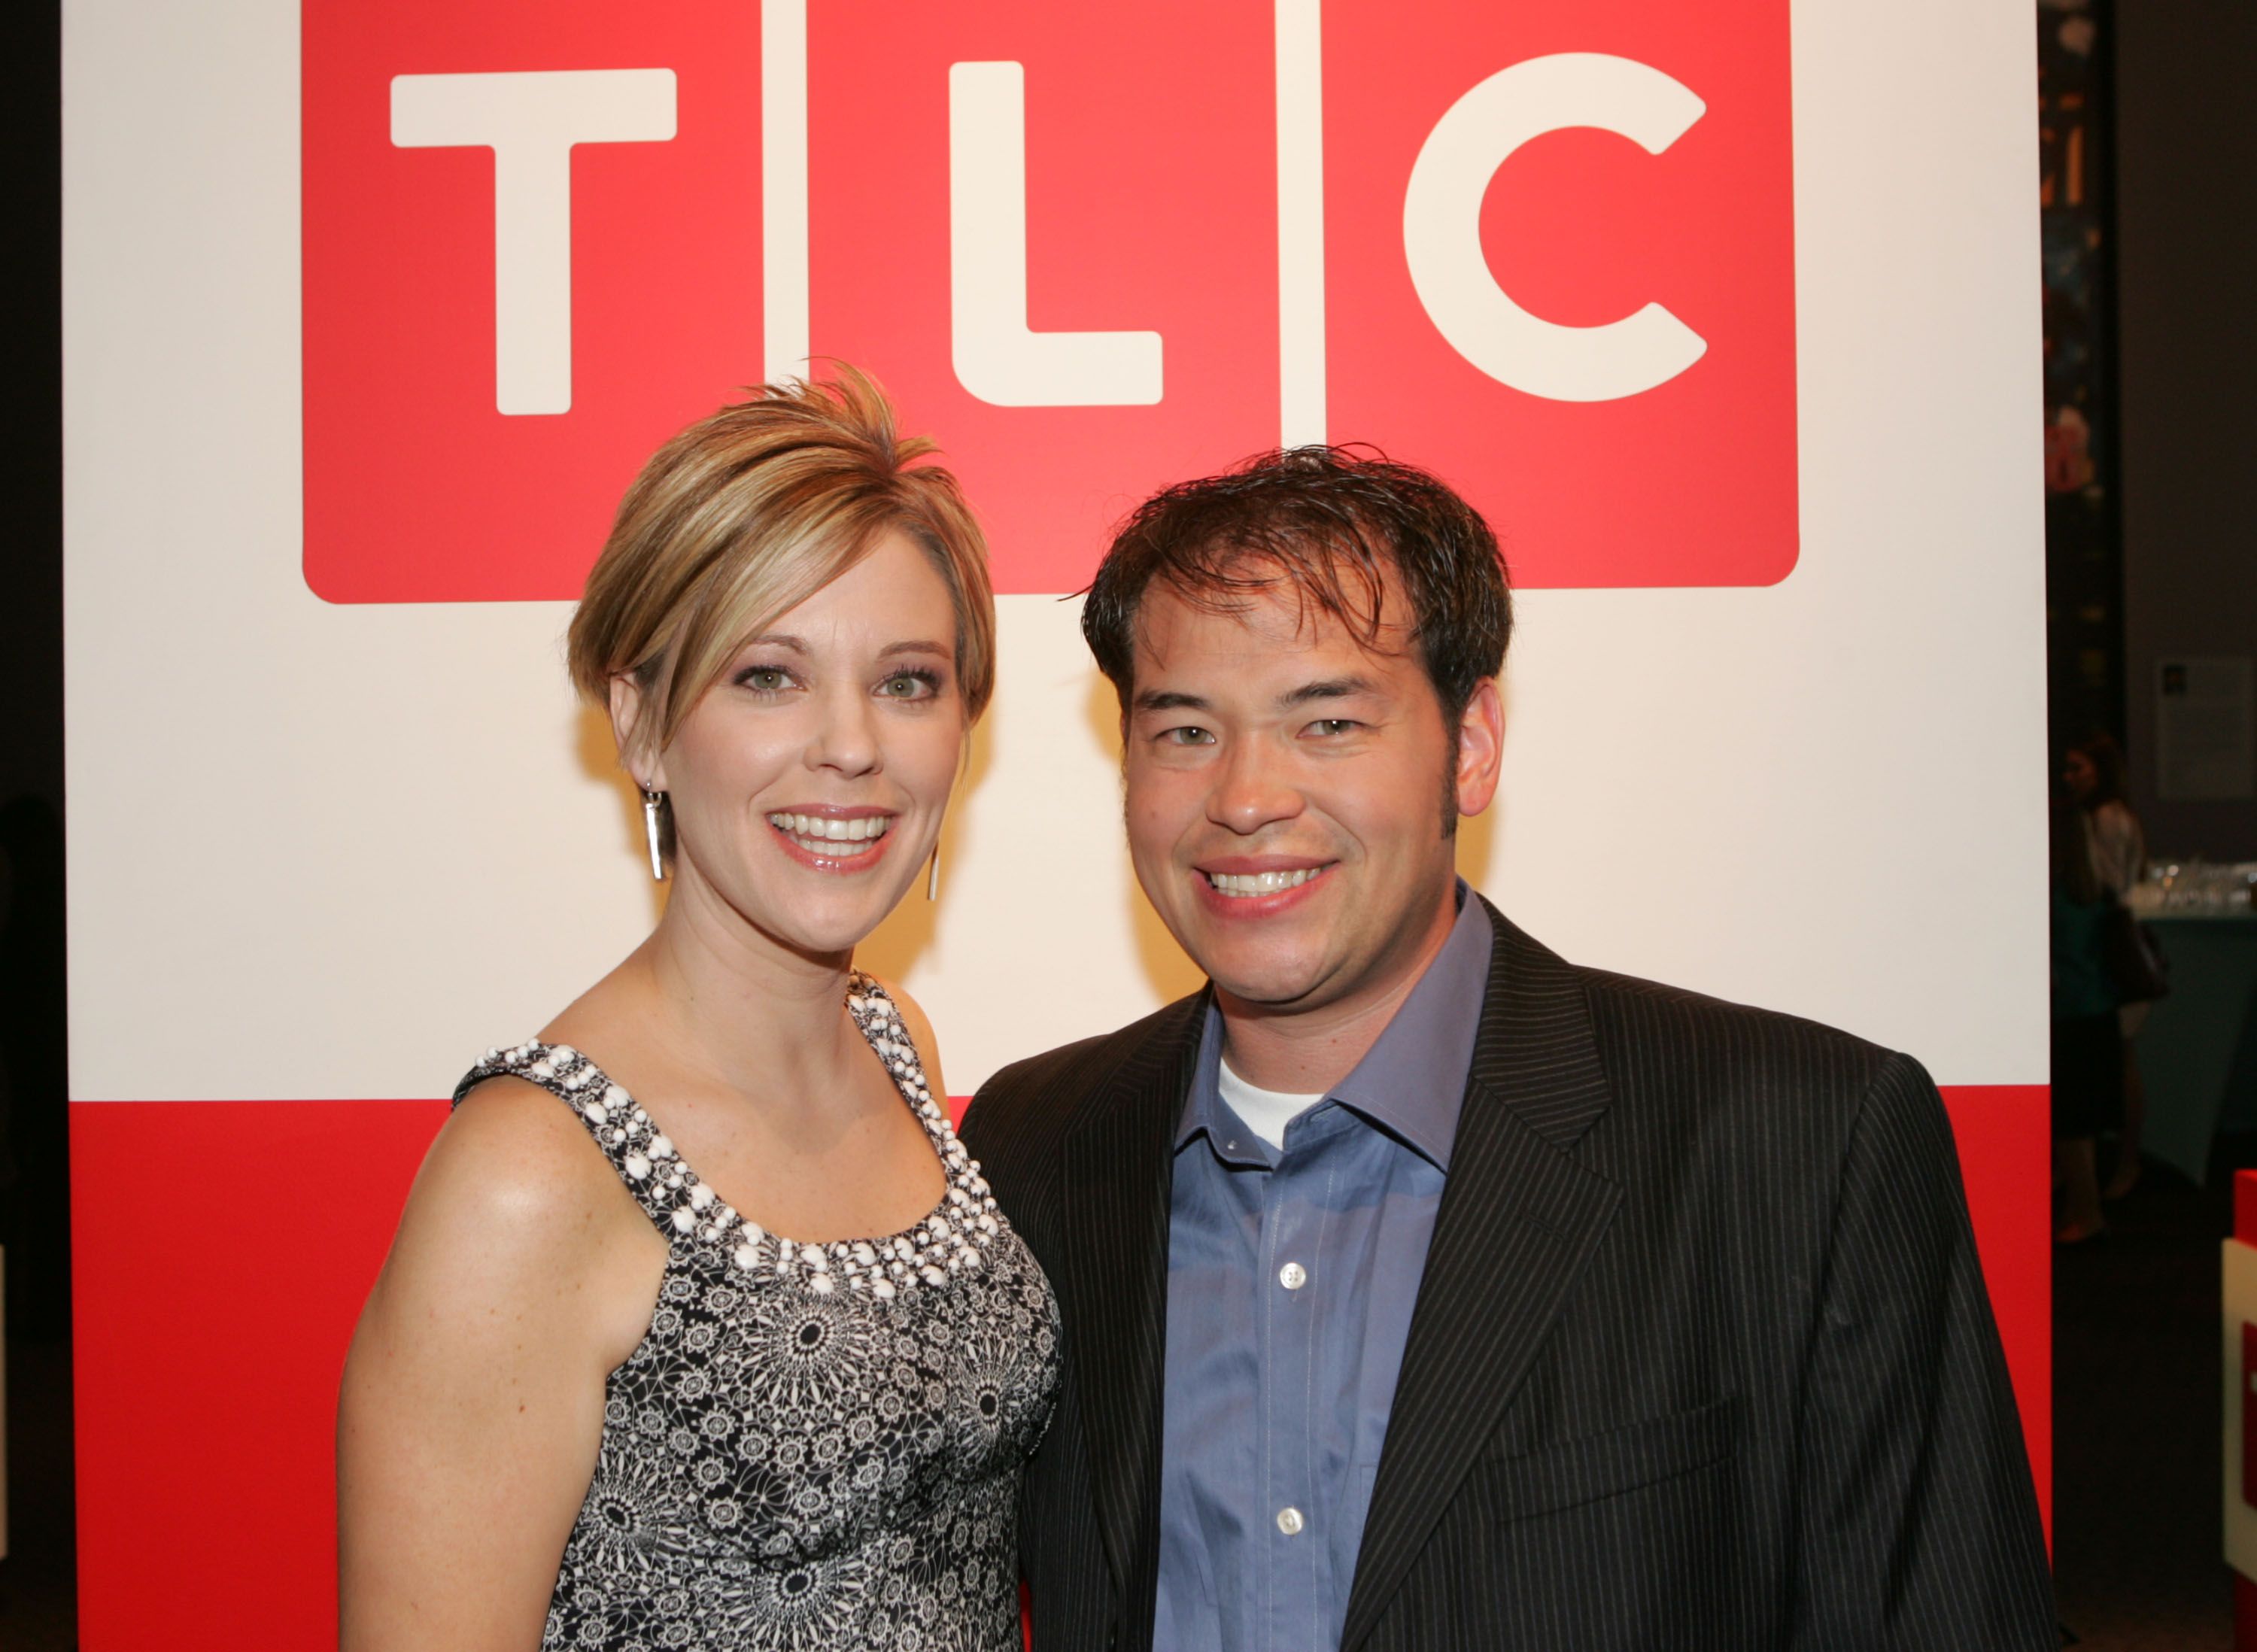 Kate and John Gosselin at the Discovery Upfront Presentation NY - Talent Images event on April 23, 2008, in New York City. | Source: Thos Robinson/Getty Images